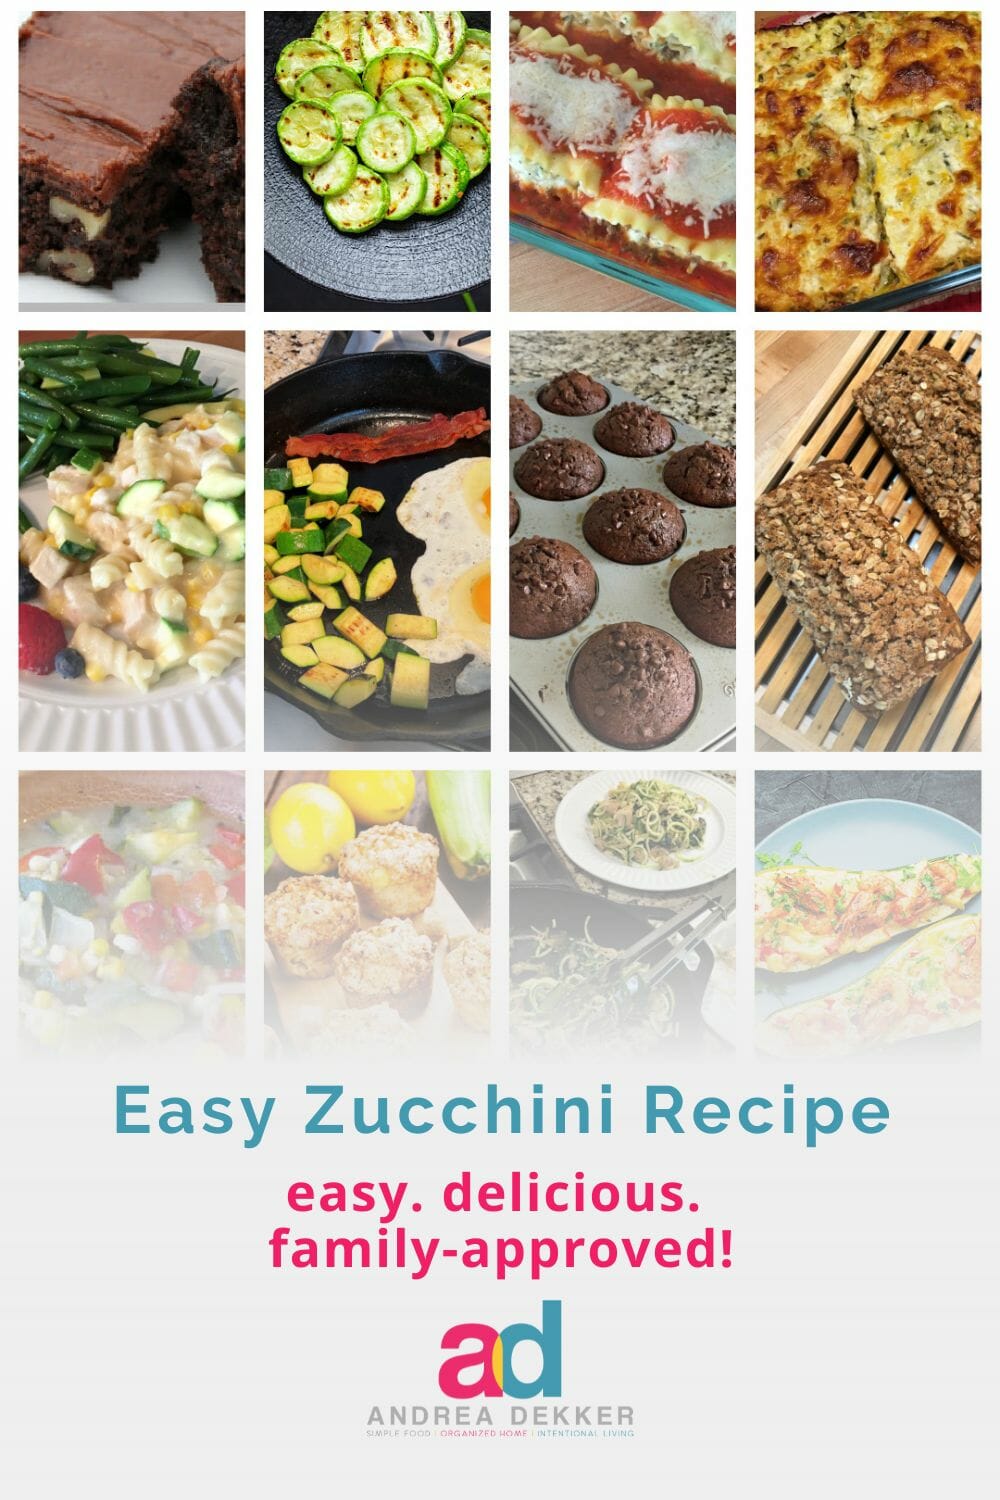 Need a few fresh ideas for zucchini? I’m sharing 10 of our family’s favorite recipes, along with a few cooking techniques that bring out new flavors and textures. via @andreadekker